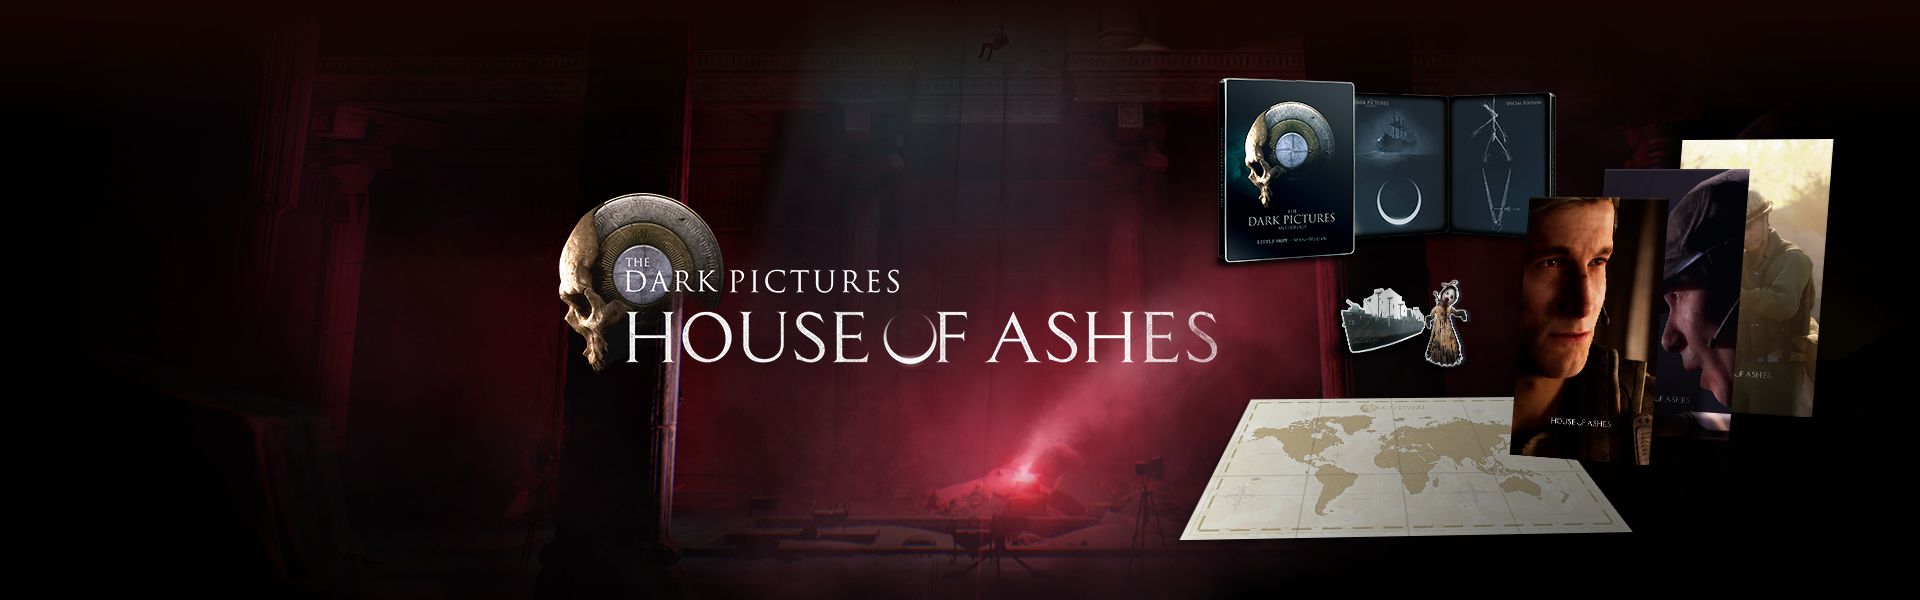 House of Ashes now available